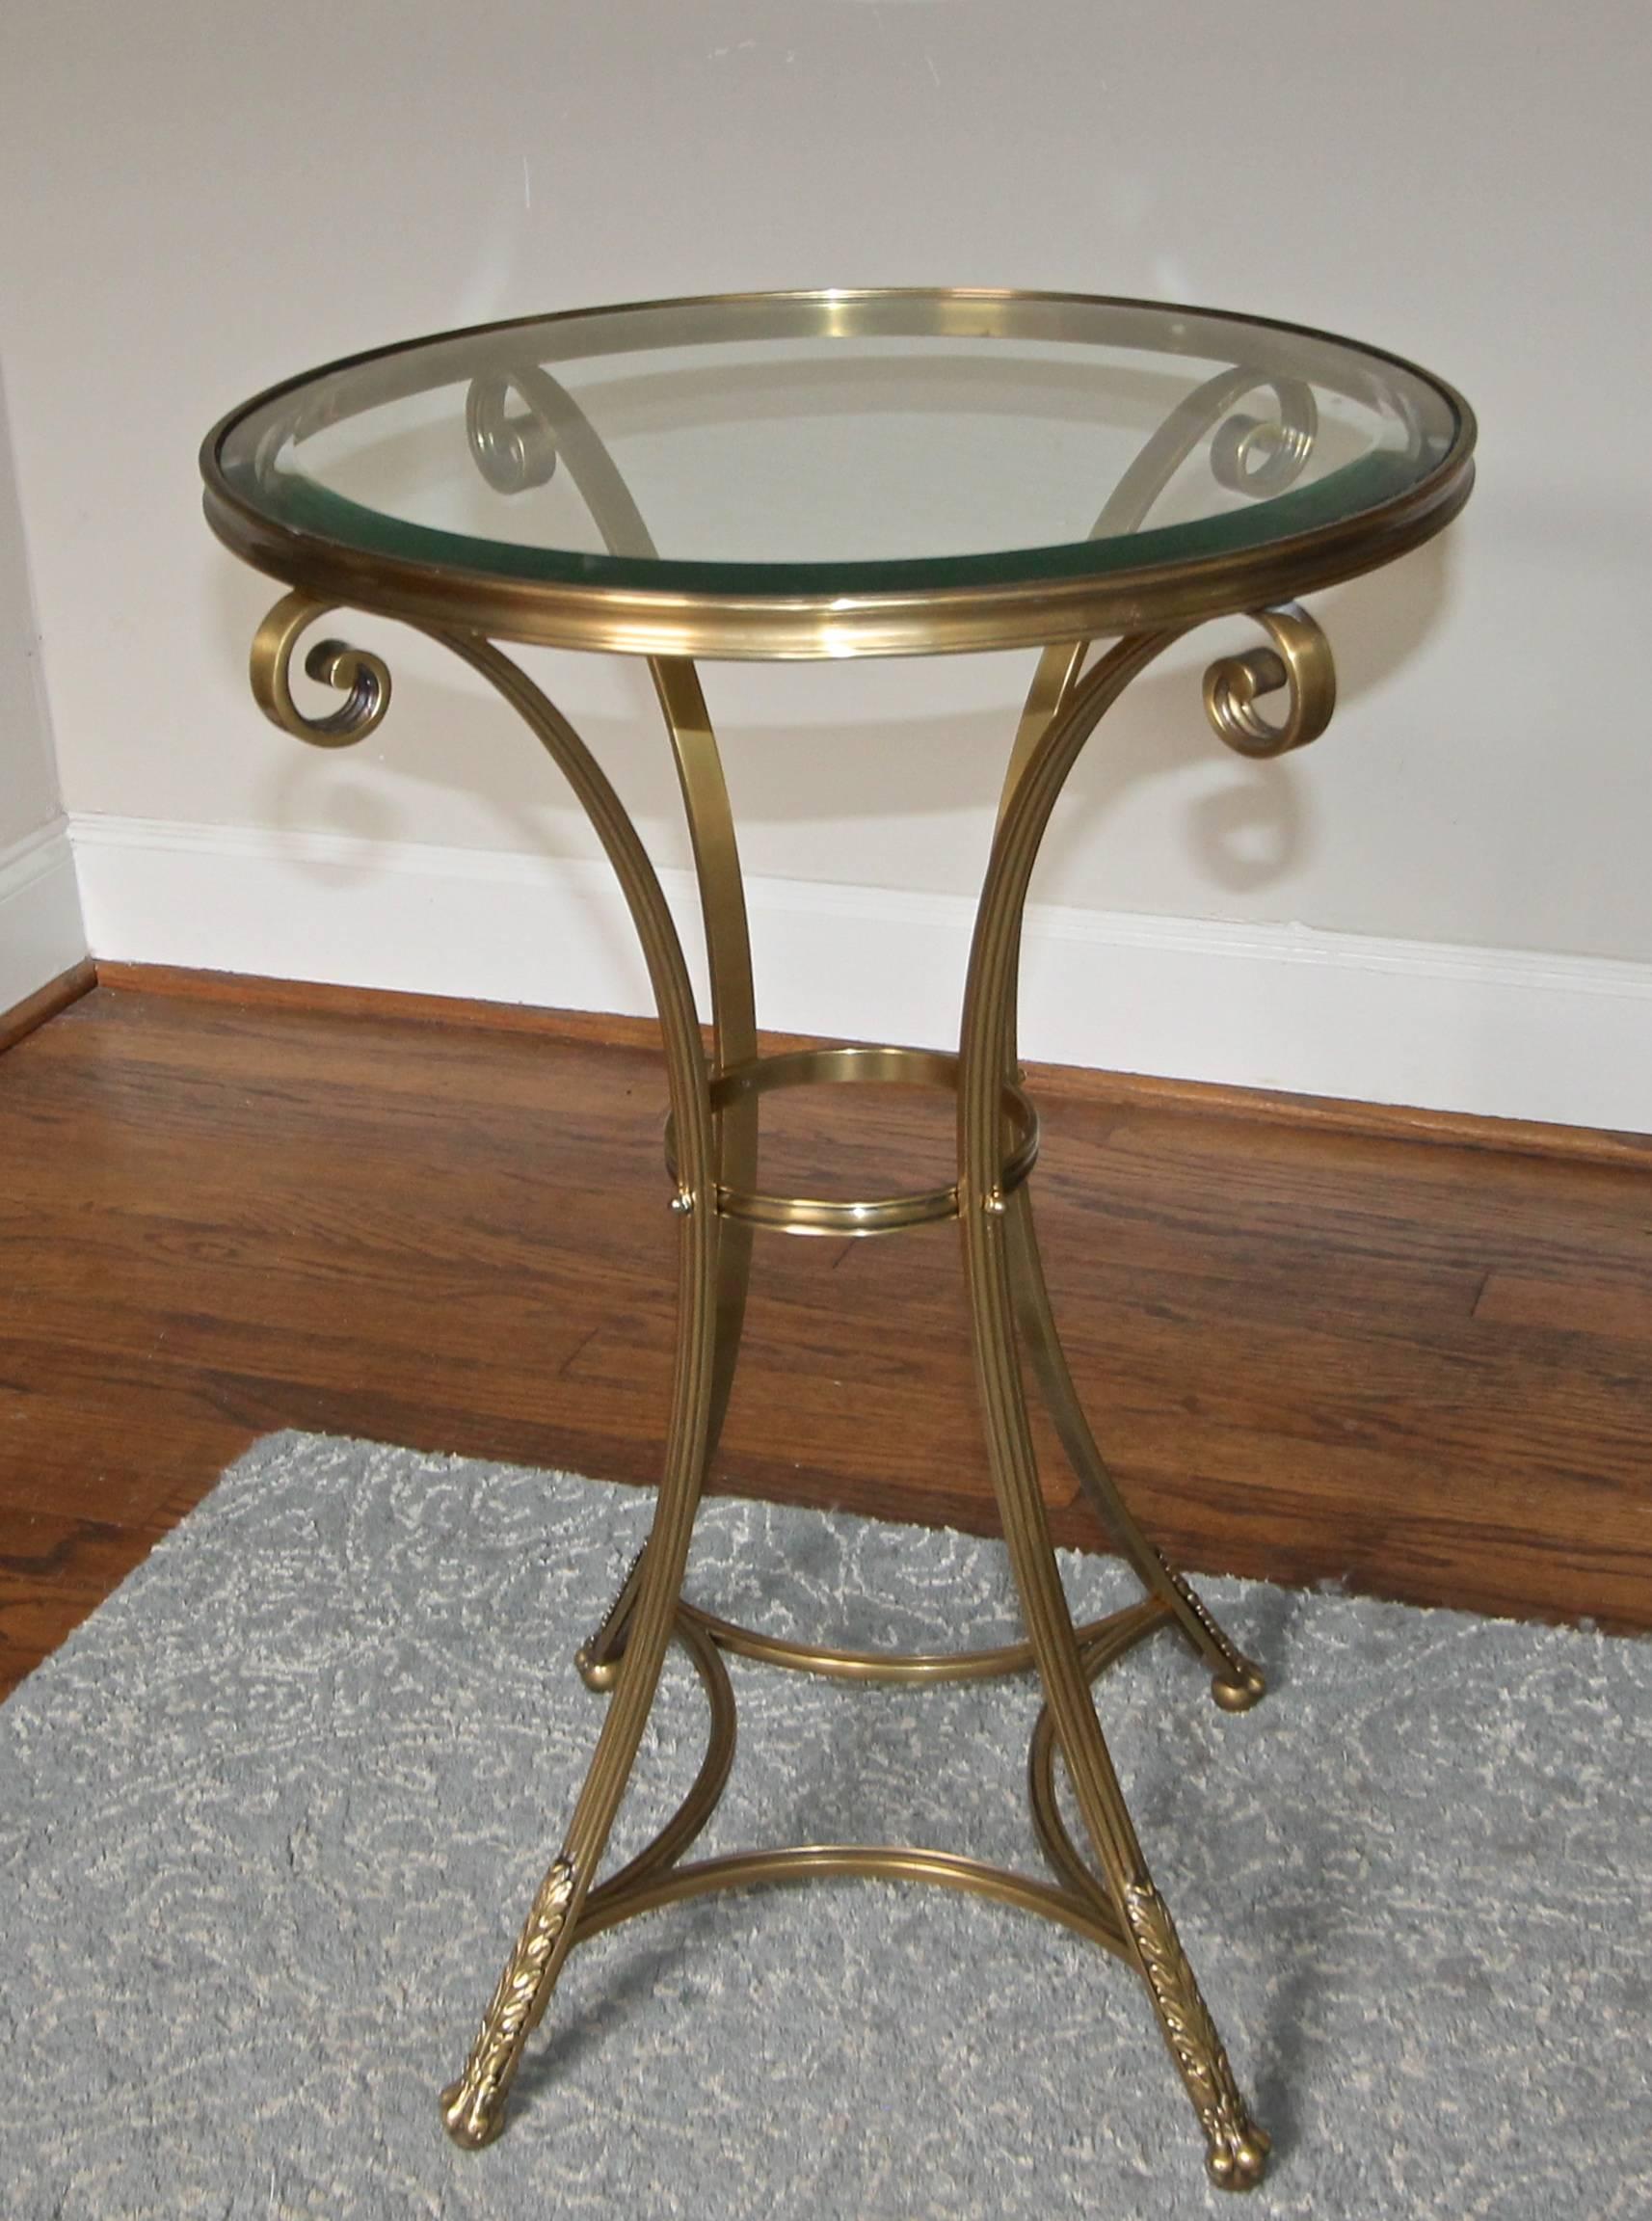 Neoclassic Brass Round Gueridon Table with Paw Feet In Good Condition For Sale In Dallas, TX